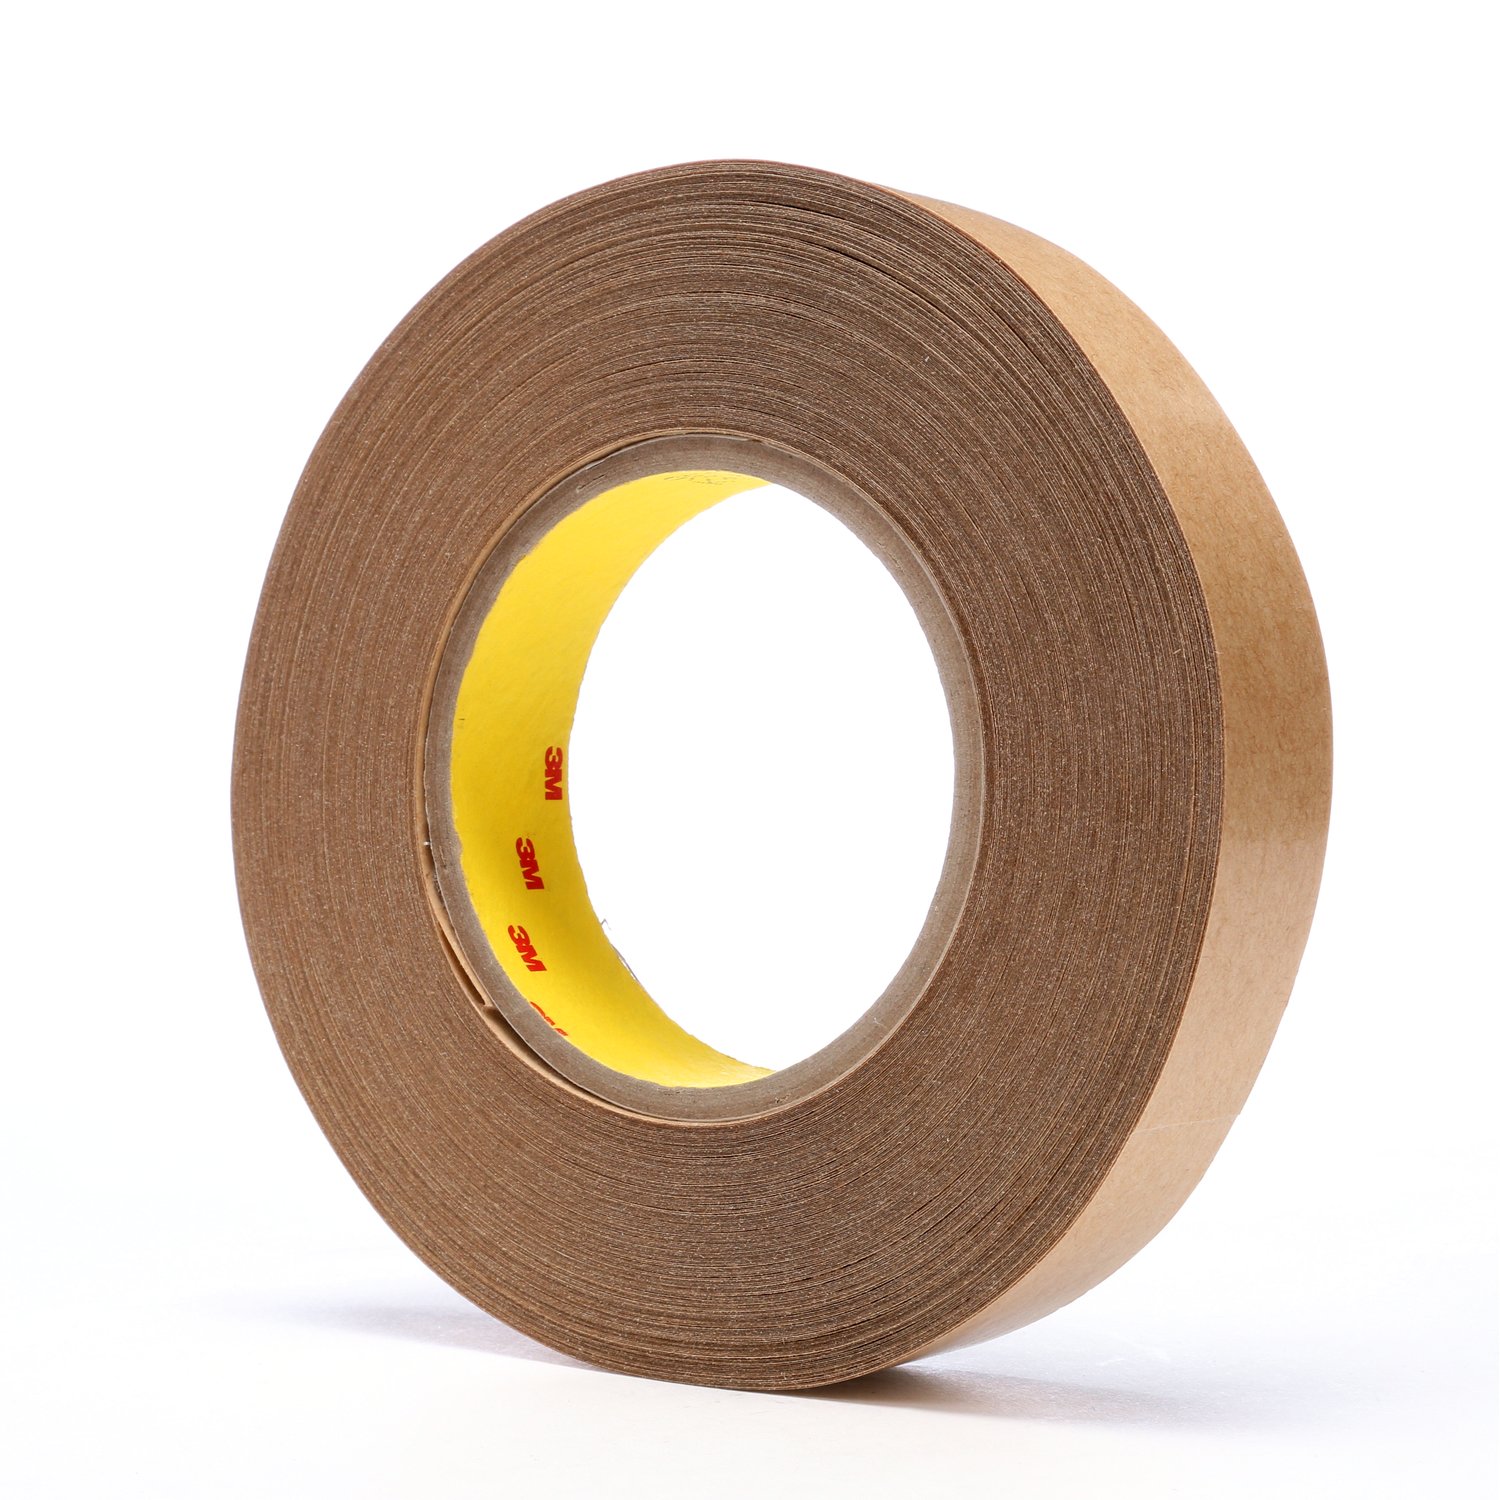 7000048430 - 3M Adhesive Transfer Tape 950, Clear, 1 in x 60 yd, 5 mil, 36 rolls per
case